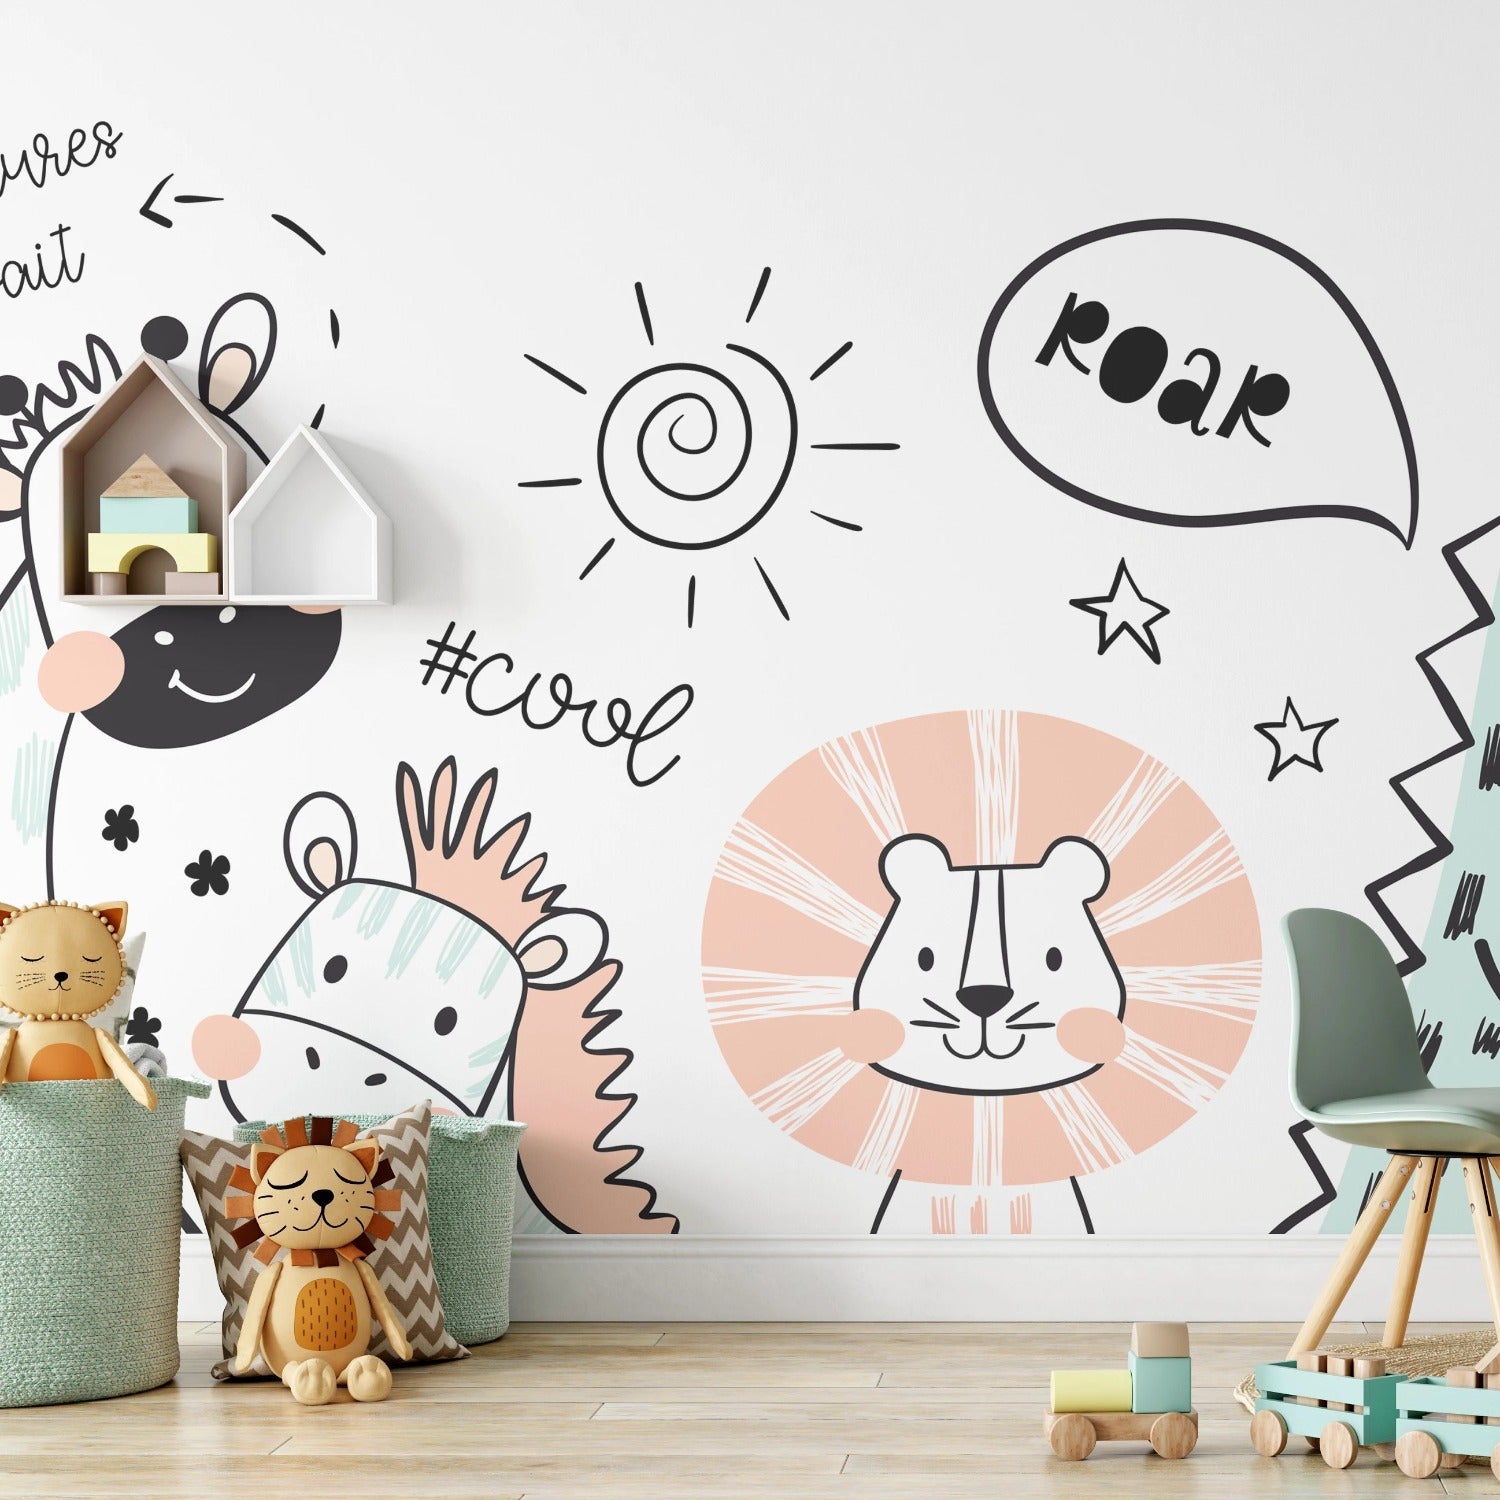 A vibrant children's room wall mural, Kids Wallpaper - Animal Mural II, with playful cartoon animals like a smiling giraffe, a friendly lion, and a cheeky crocodile. Words like 'adventures await' and 'roar' bubble around them, encouraging a playful and imaginative atmosphere.